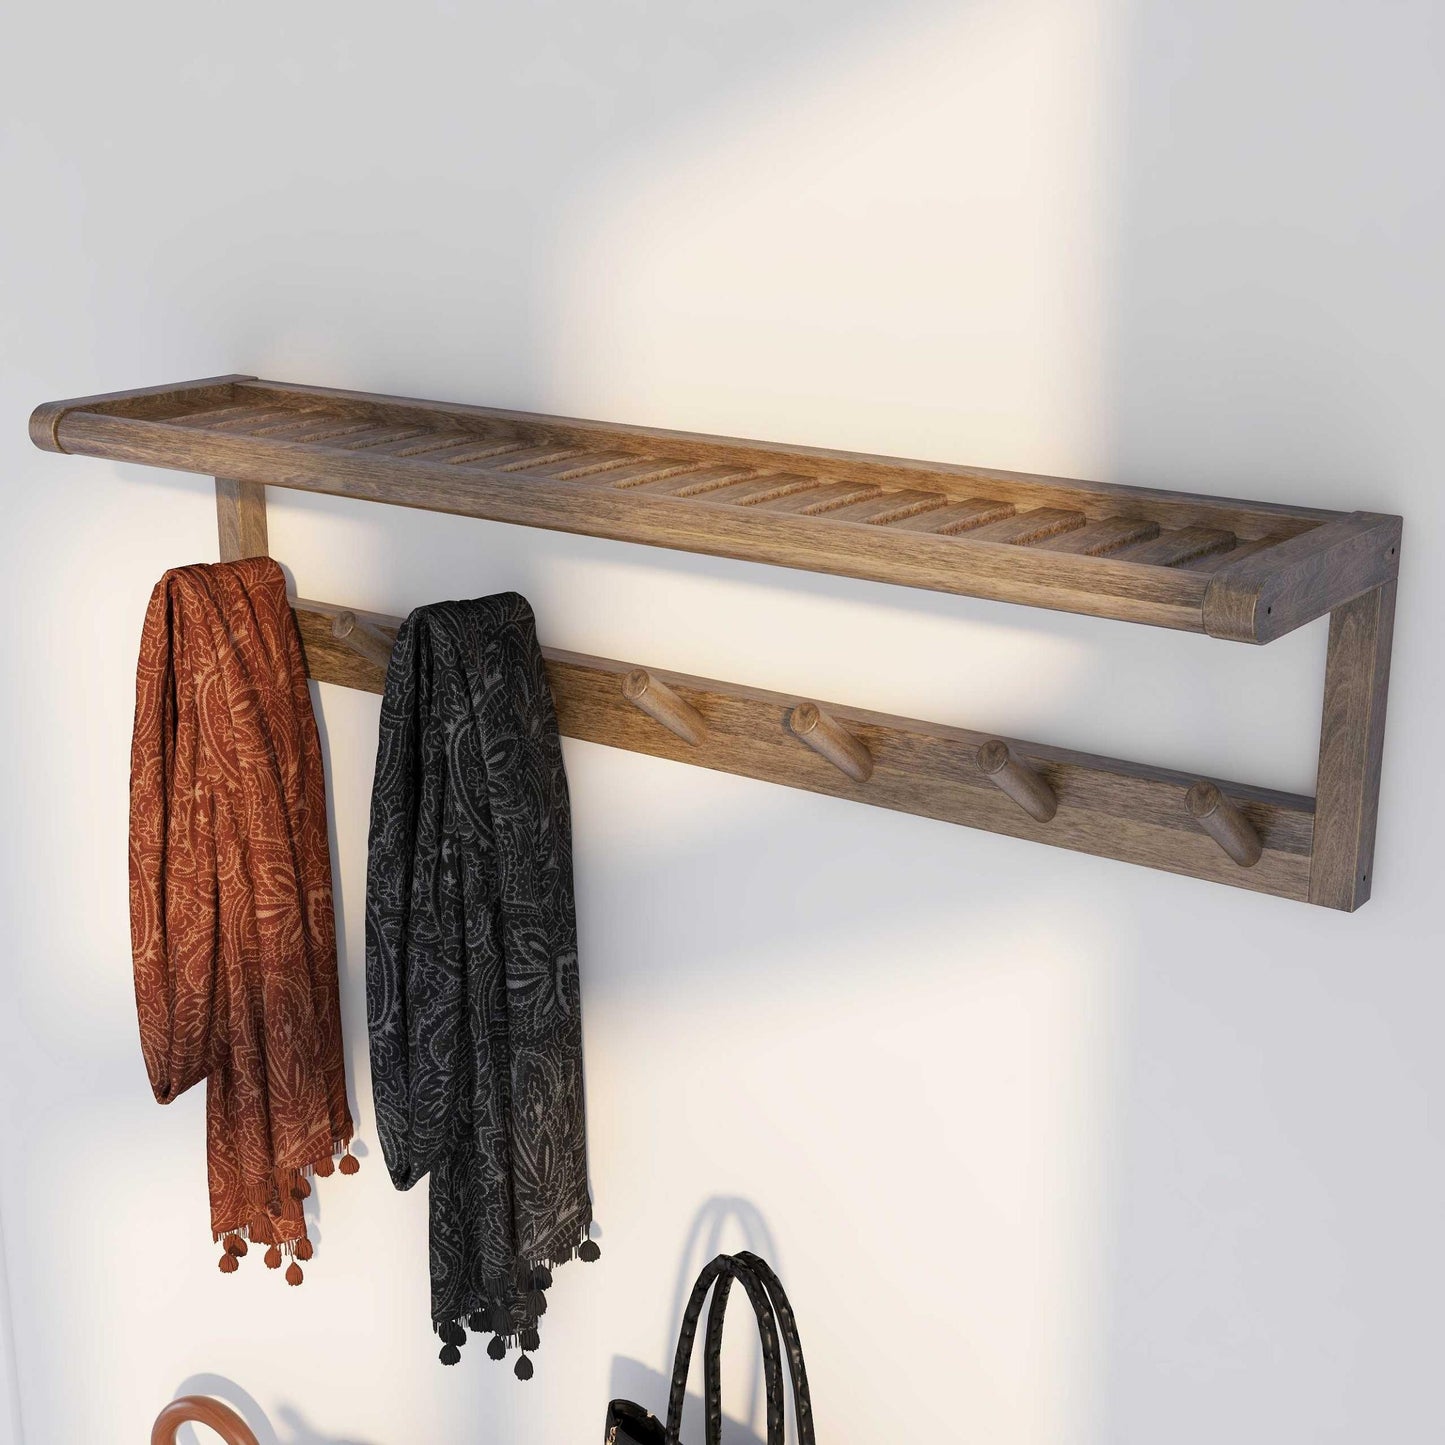 8" Wooden Wallmounted Large Peg Rack with Shelf in Antique Chesnut